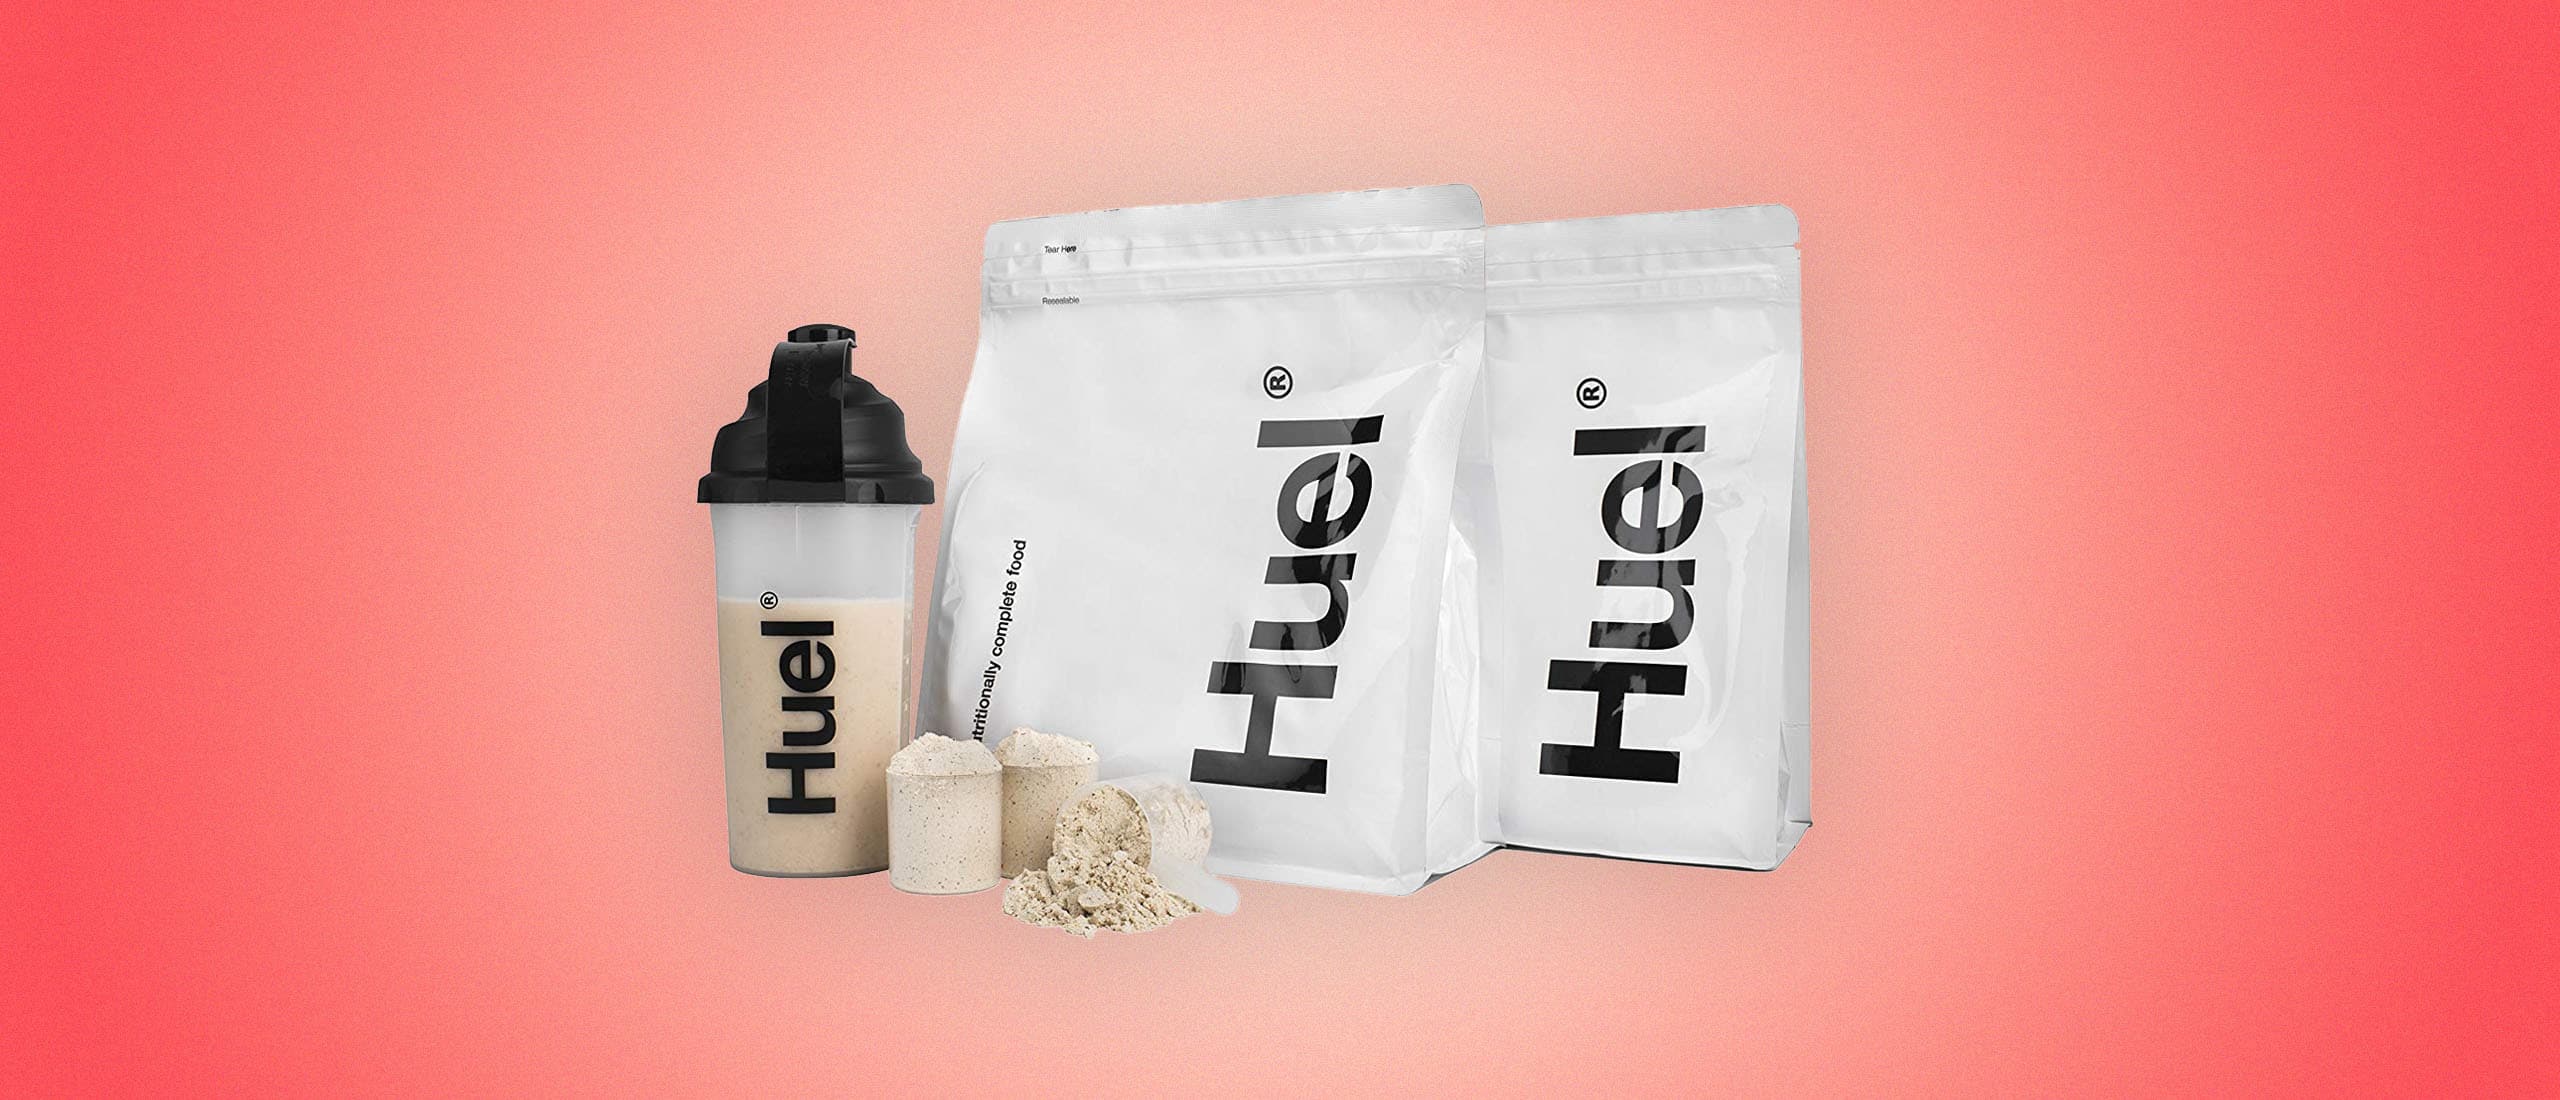 Three Huel products in a row